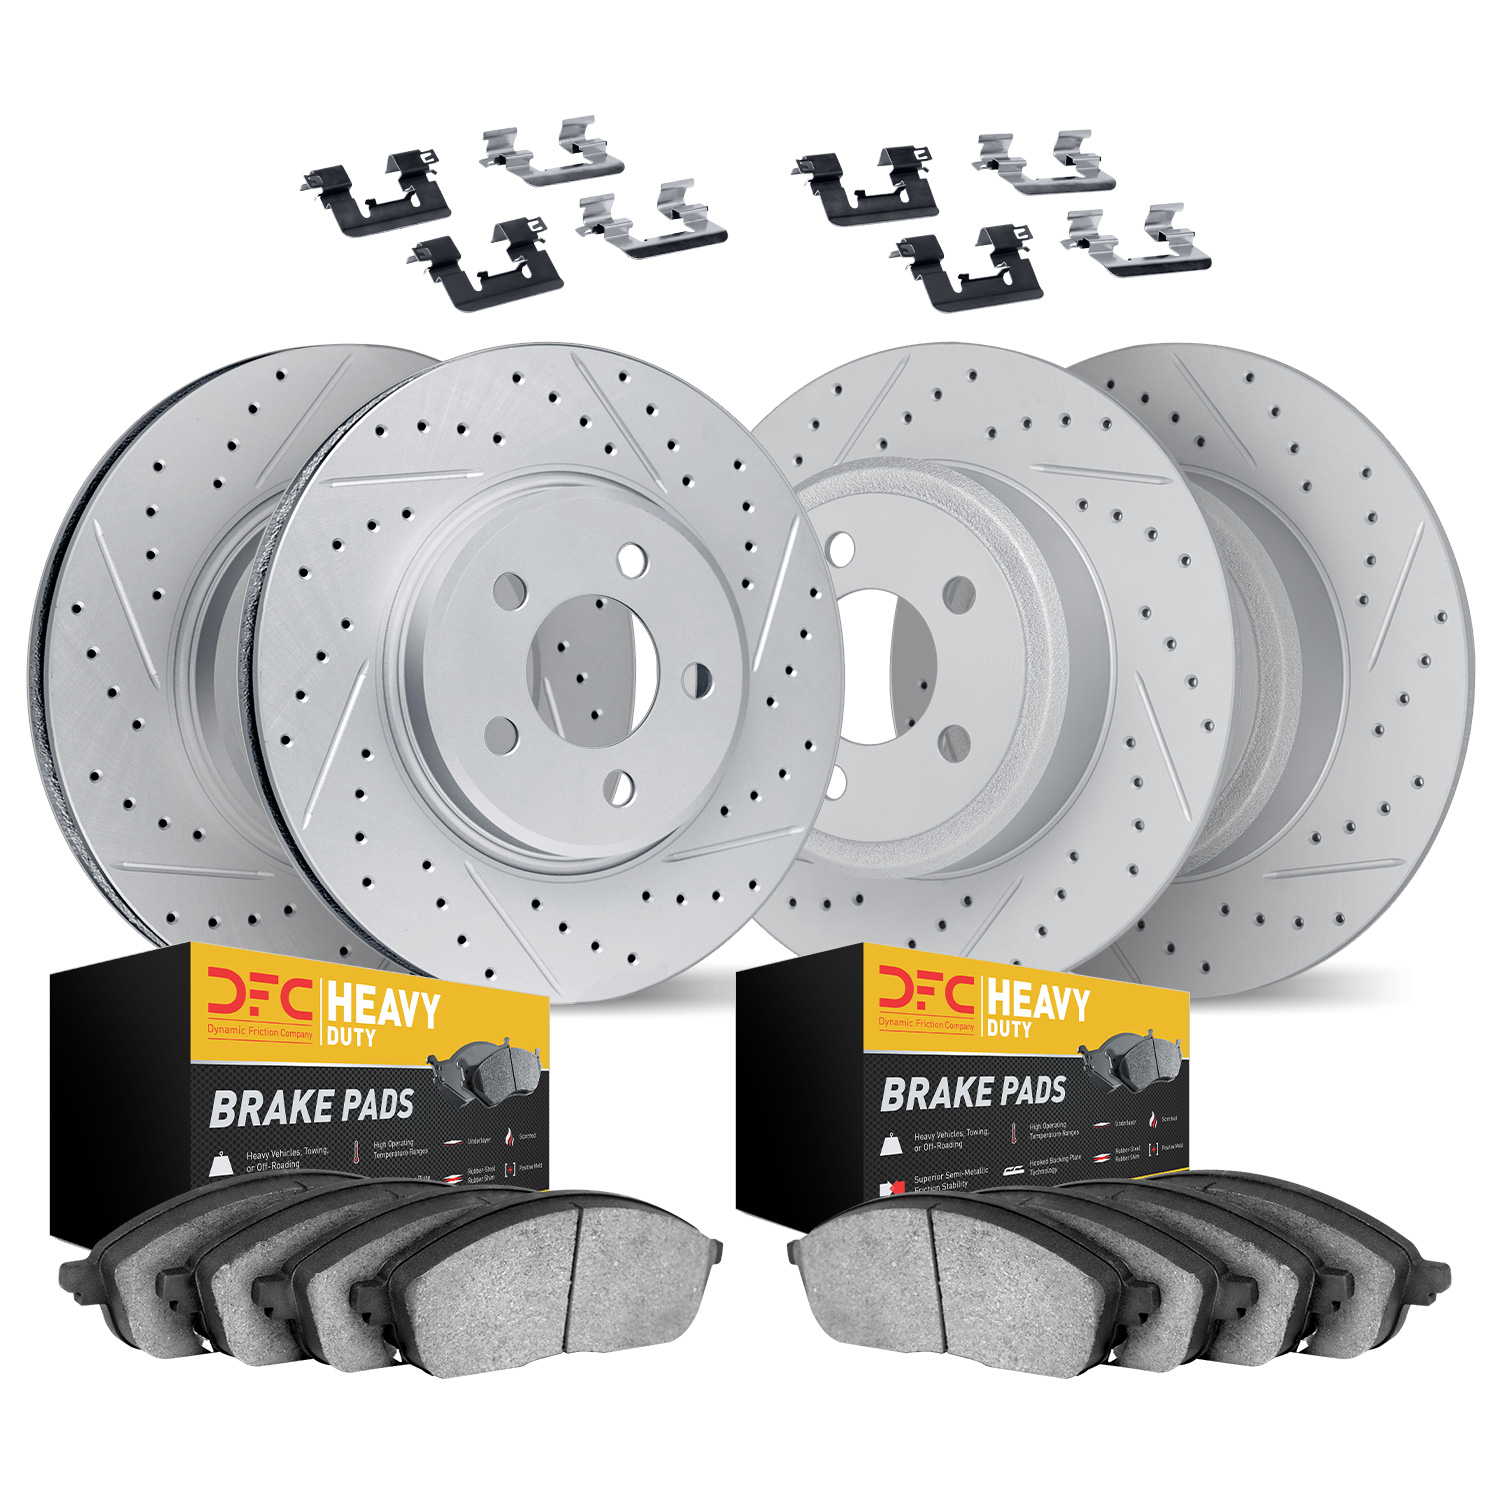 2214-54001 Geoperformance Drilled/Slotted Rotors w/Heavy-Duty Pads Kit & Hardware, 2006-2010 Ford/Lincoln/Mercury/Mazda, Positio